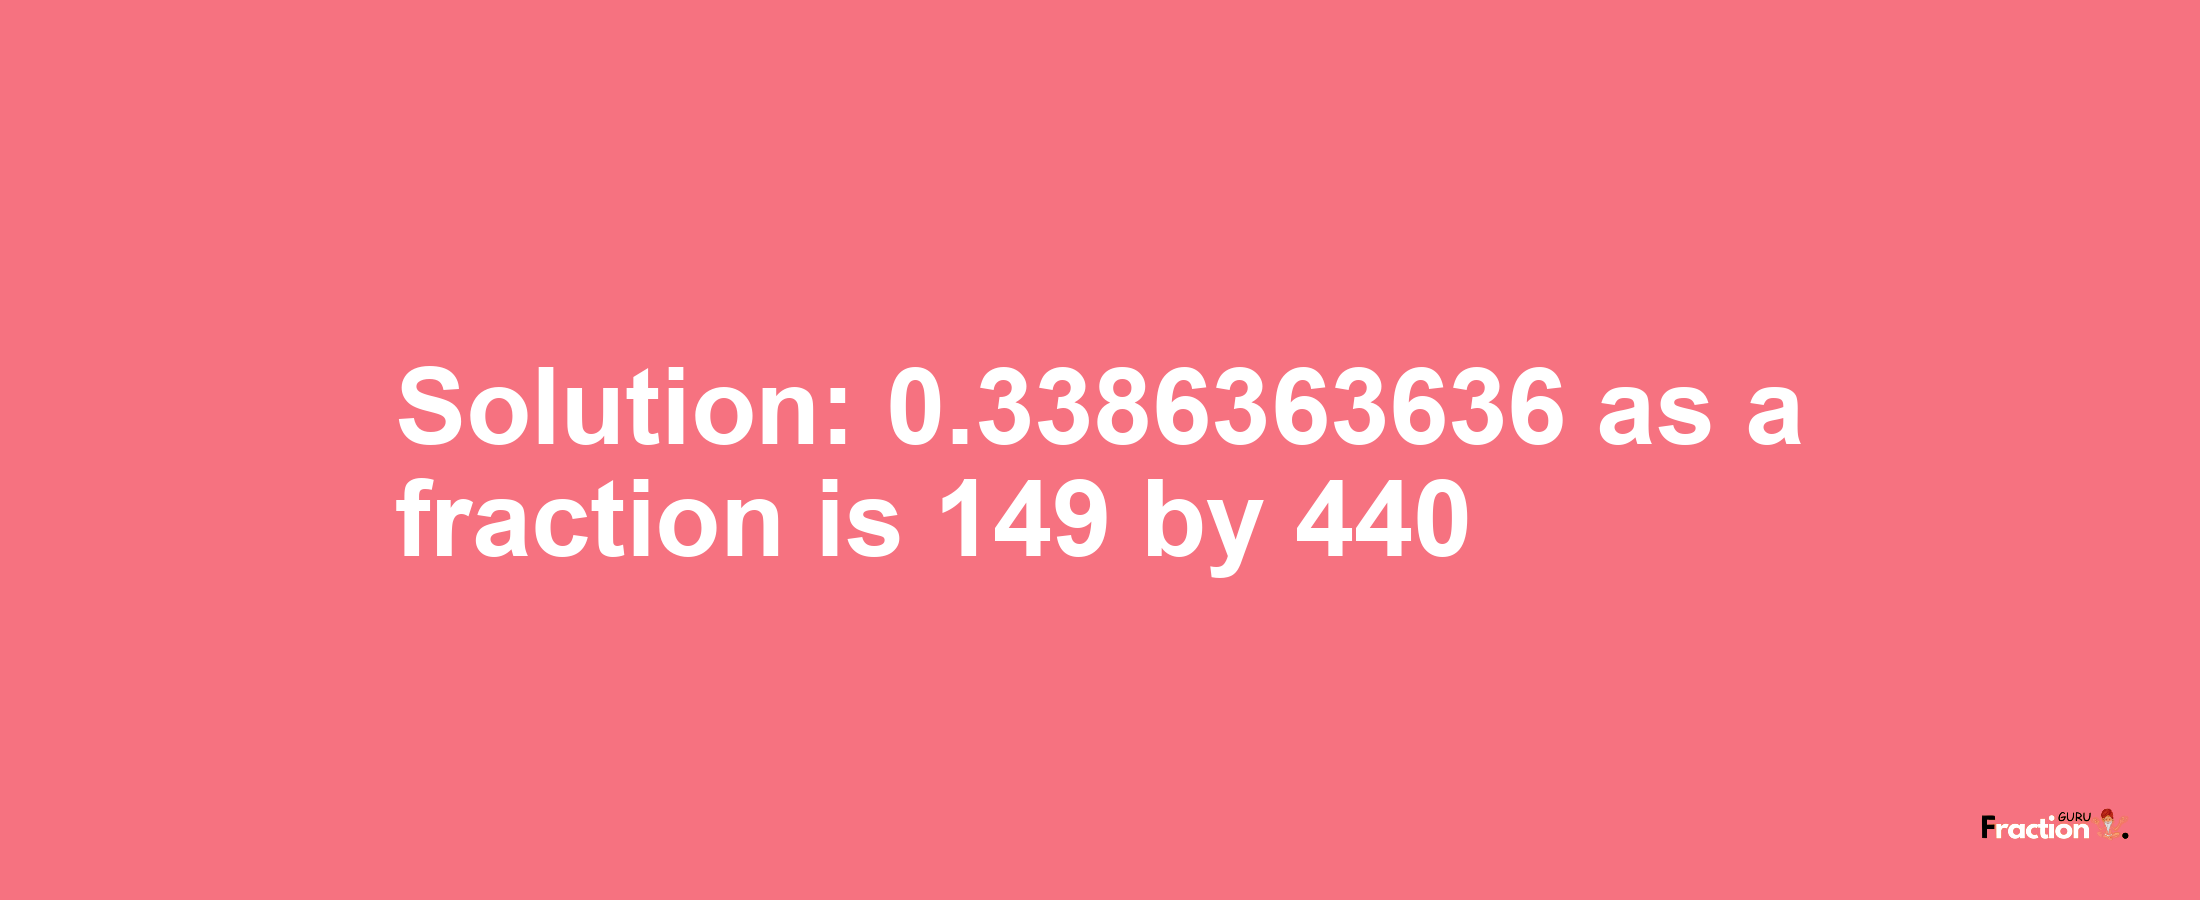 Solution:0.3386363636 as a fraction is 149/440